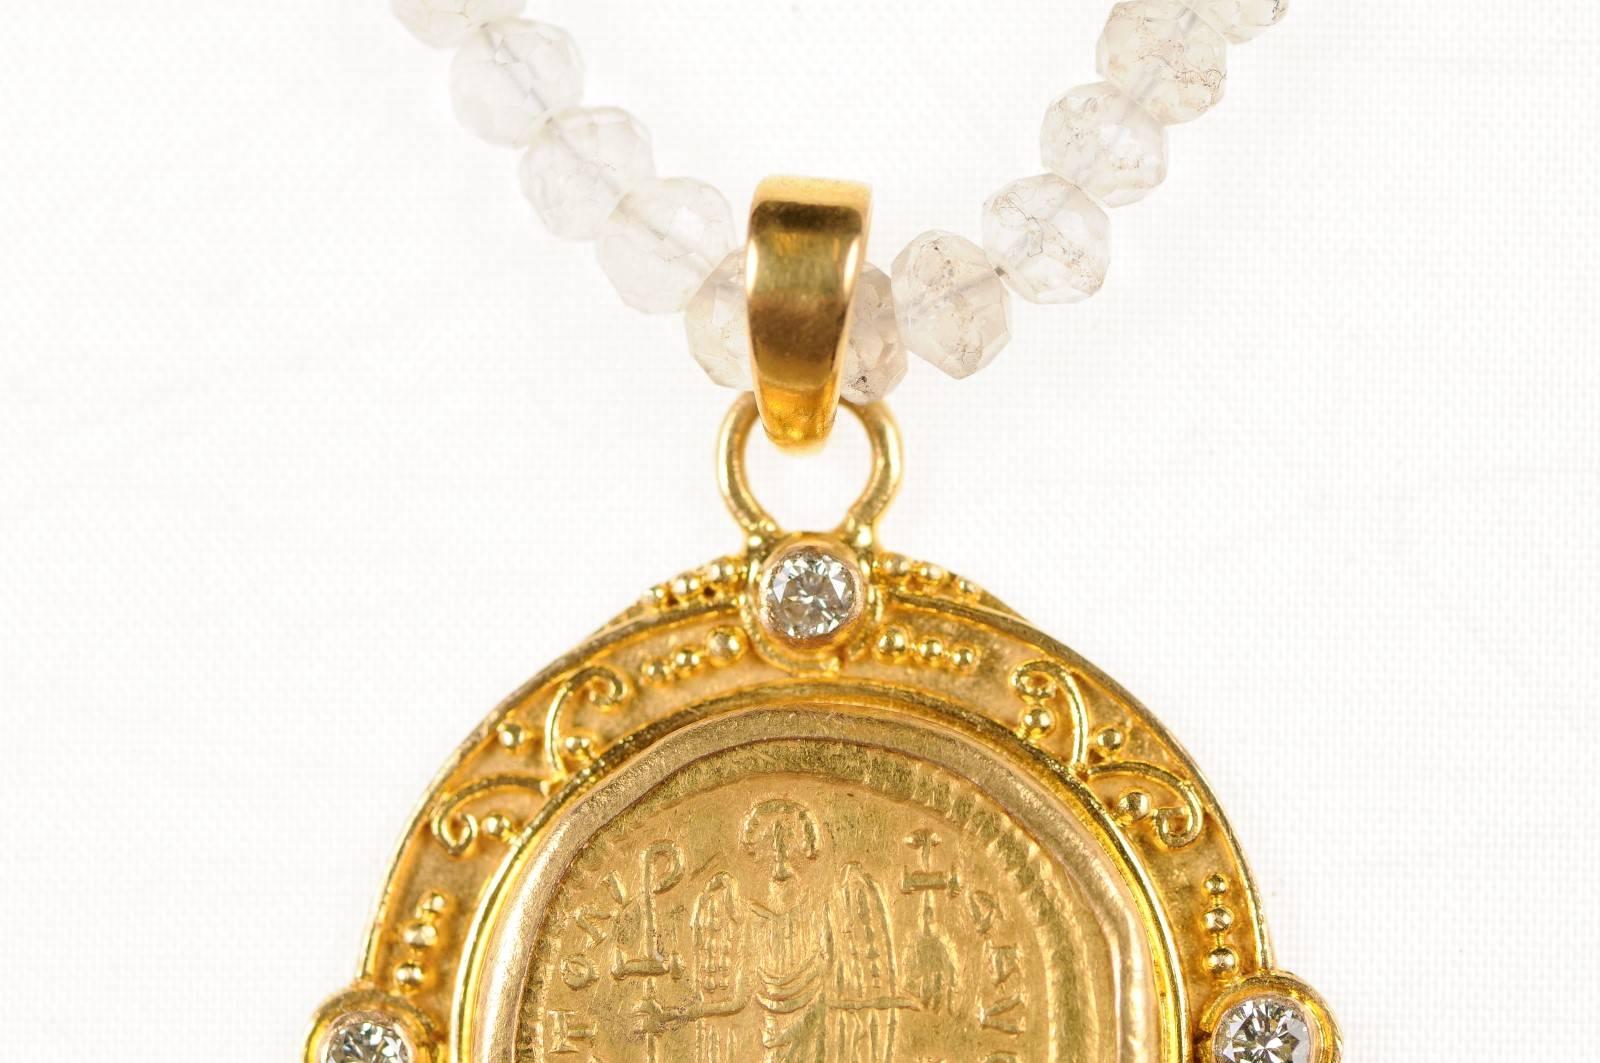 Patinated Justinian I, AV Roman Coin Necklace with 22-Karat Gold Bezel and Diamond Accents